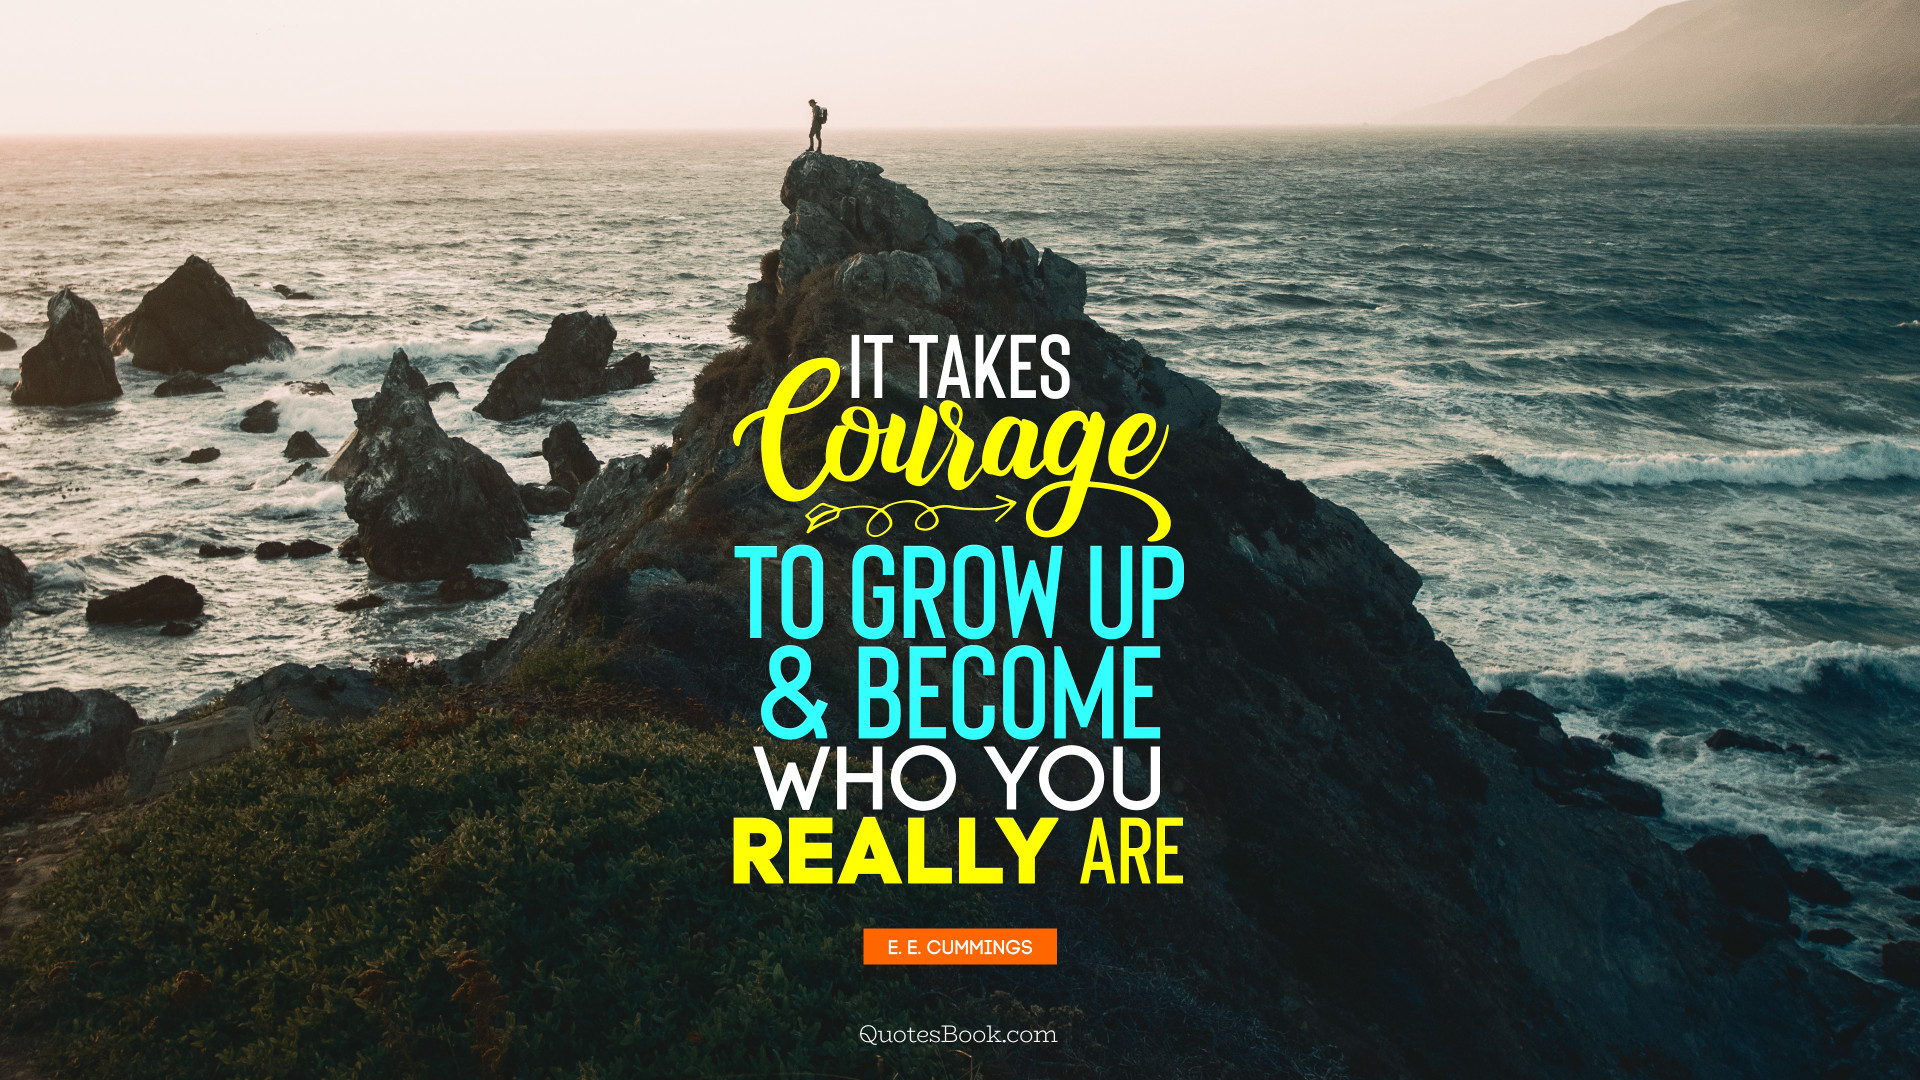 It takes courage to grow up and become who you really are. - Quote by E